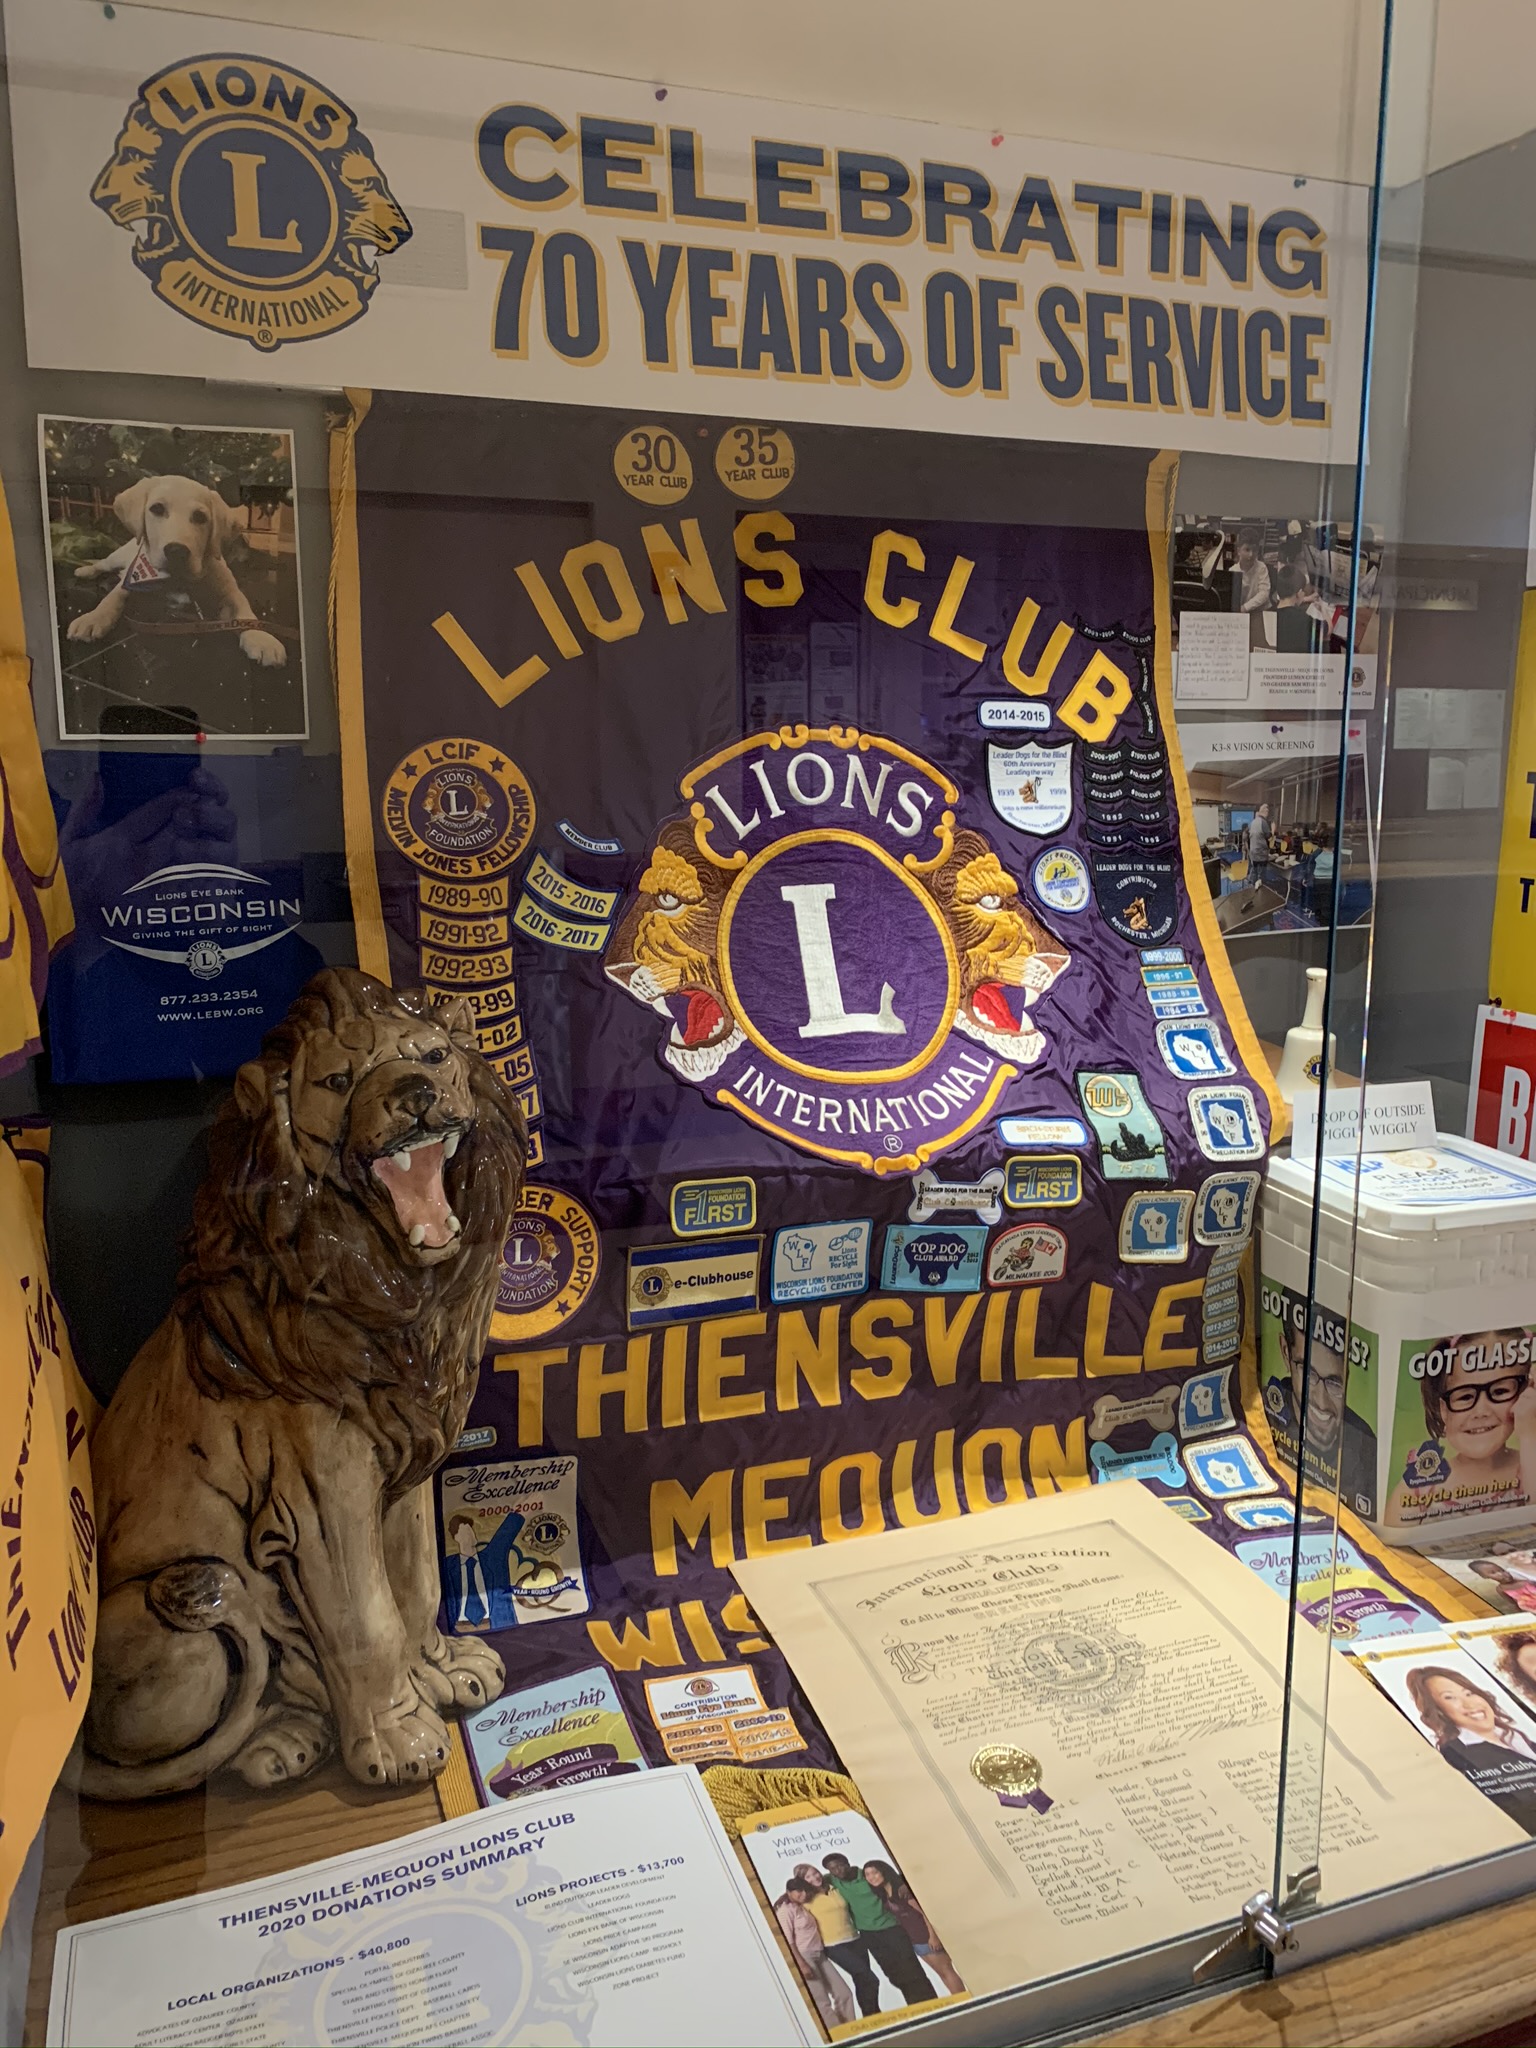 Celebrating 70 Years of Service